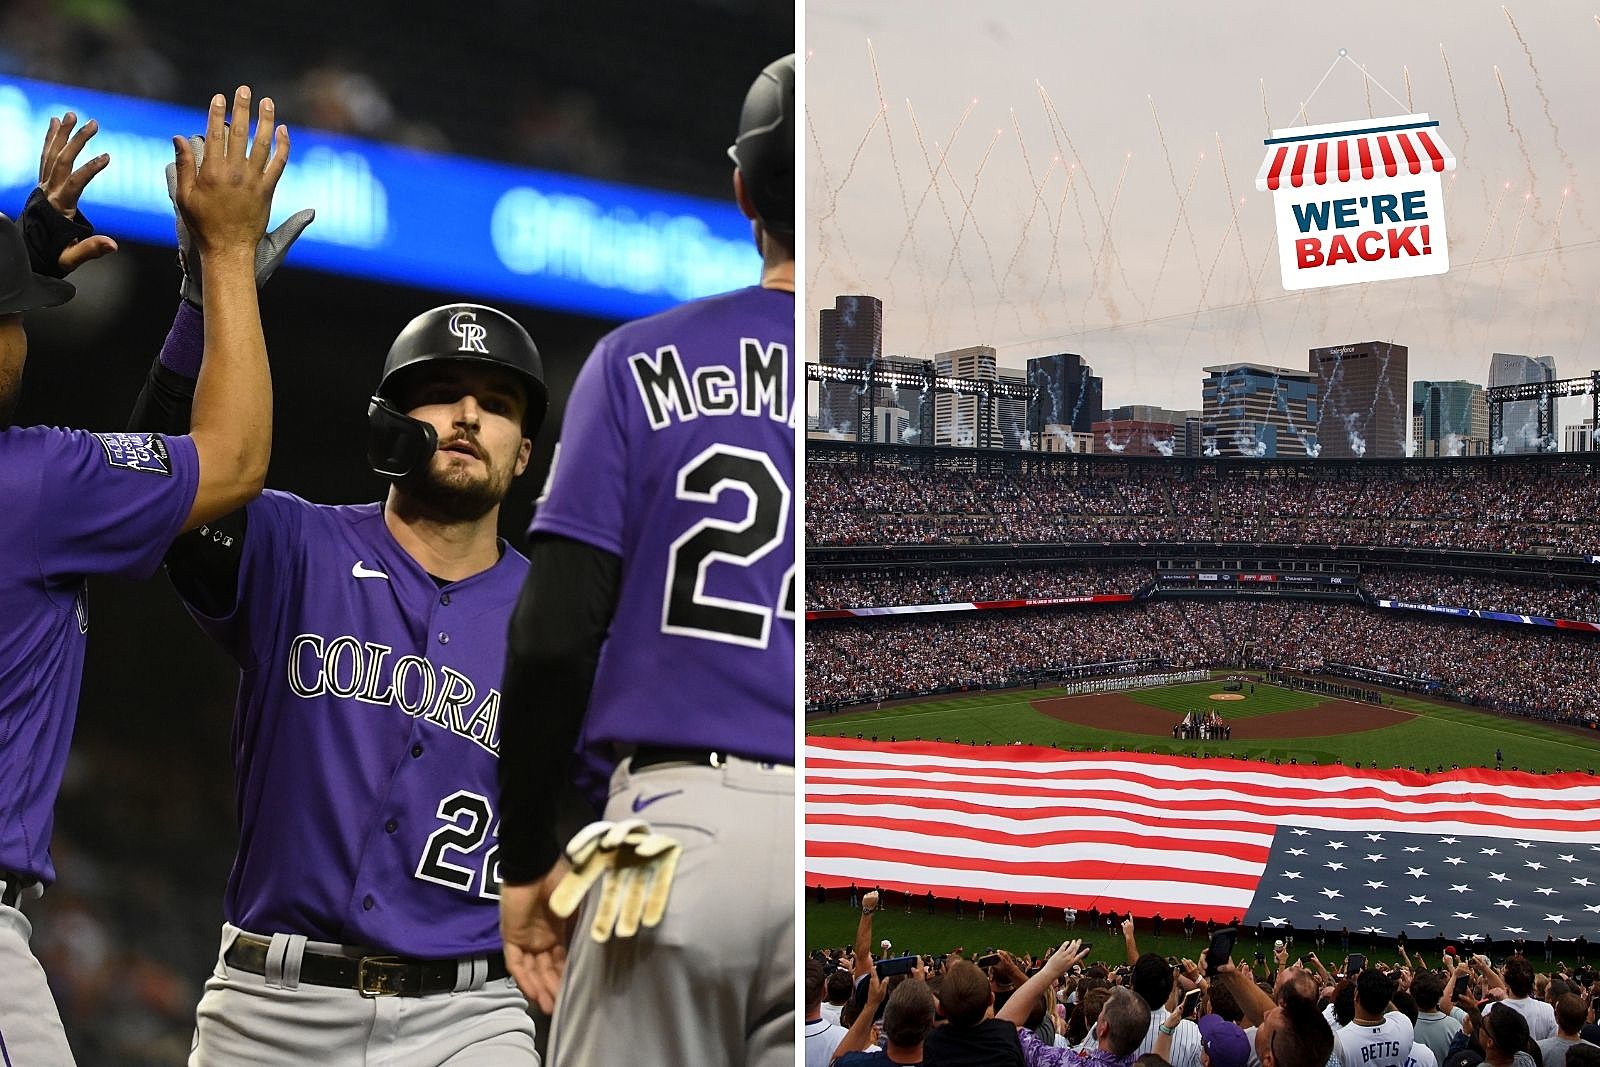 Rockies opening day 2022: Everything you need to know